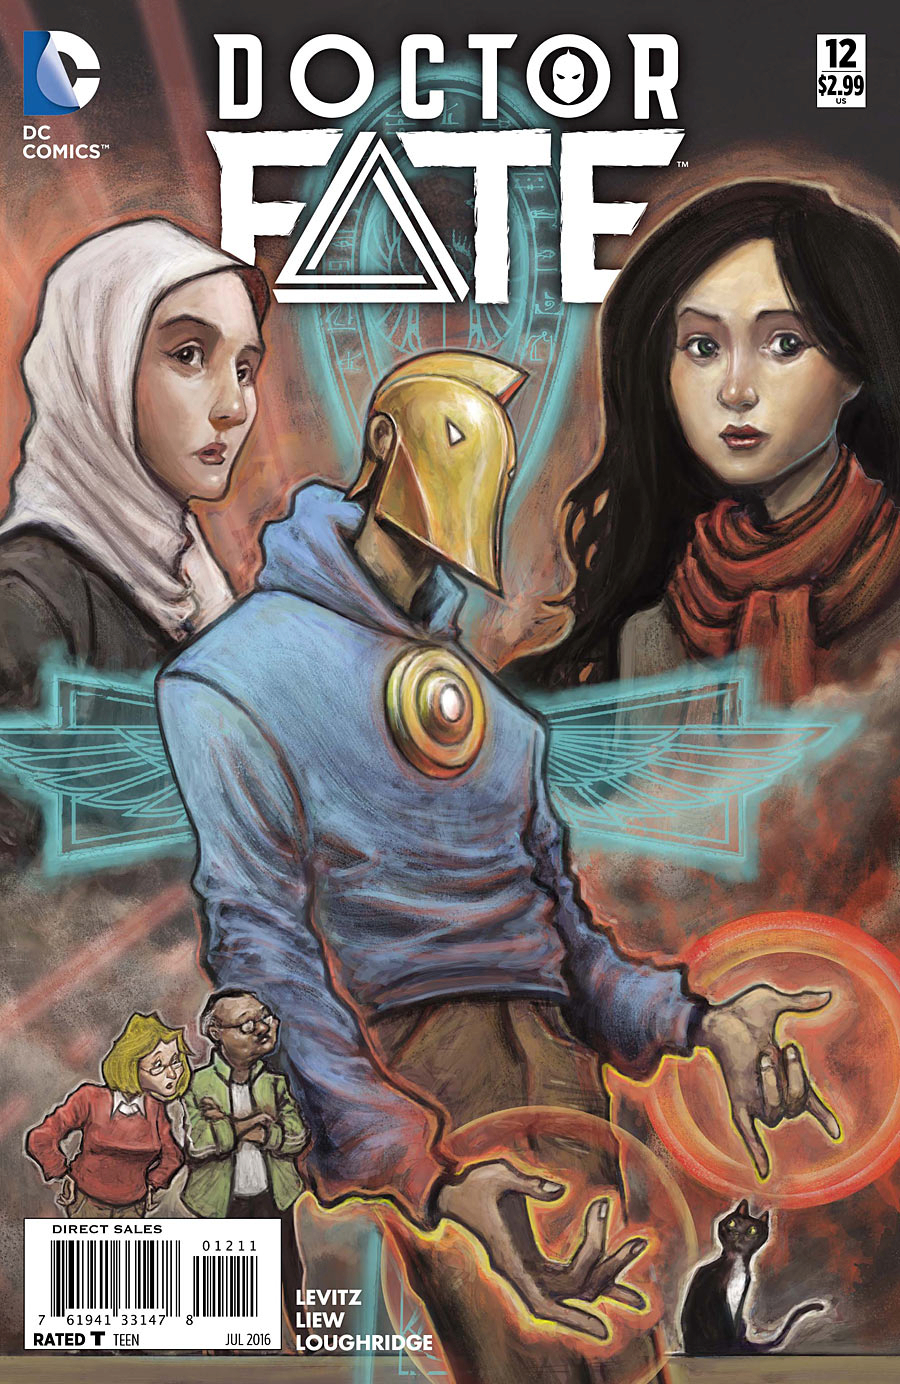 DOCTOR FATE #12